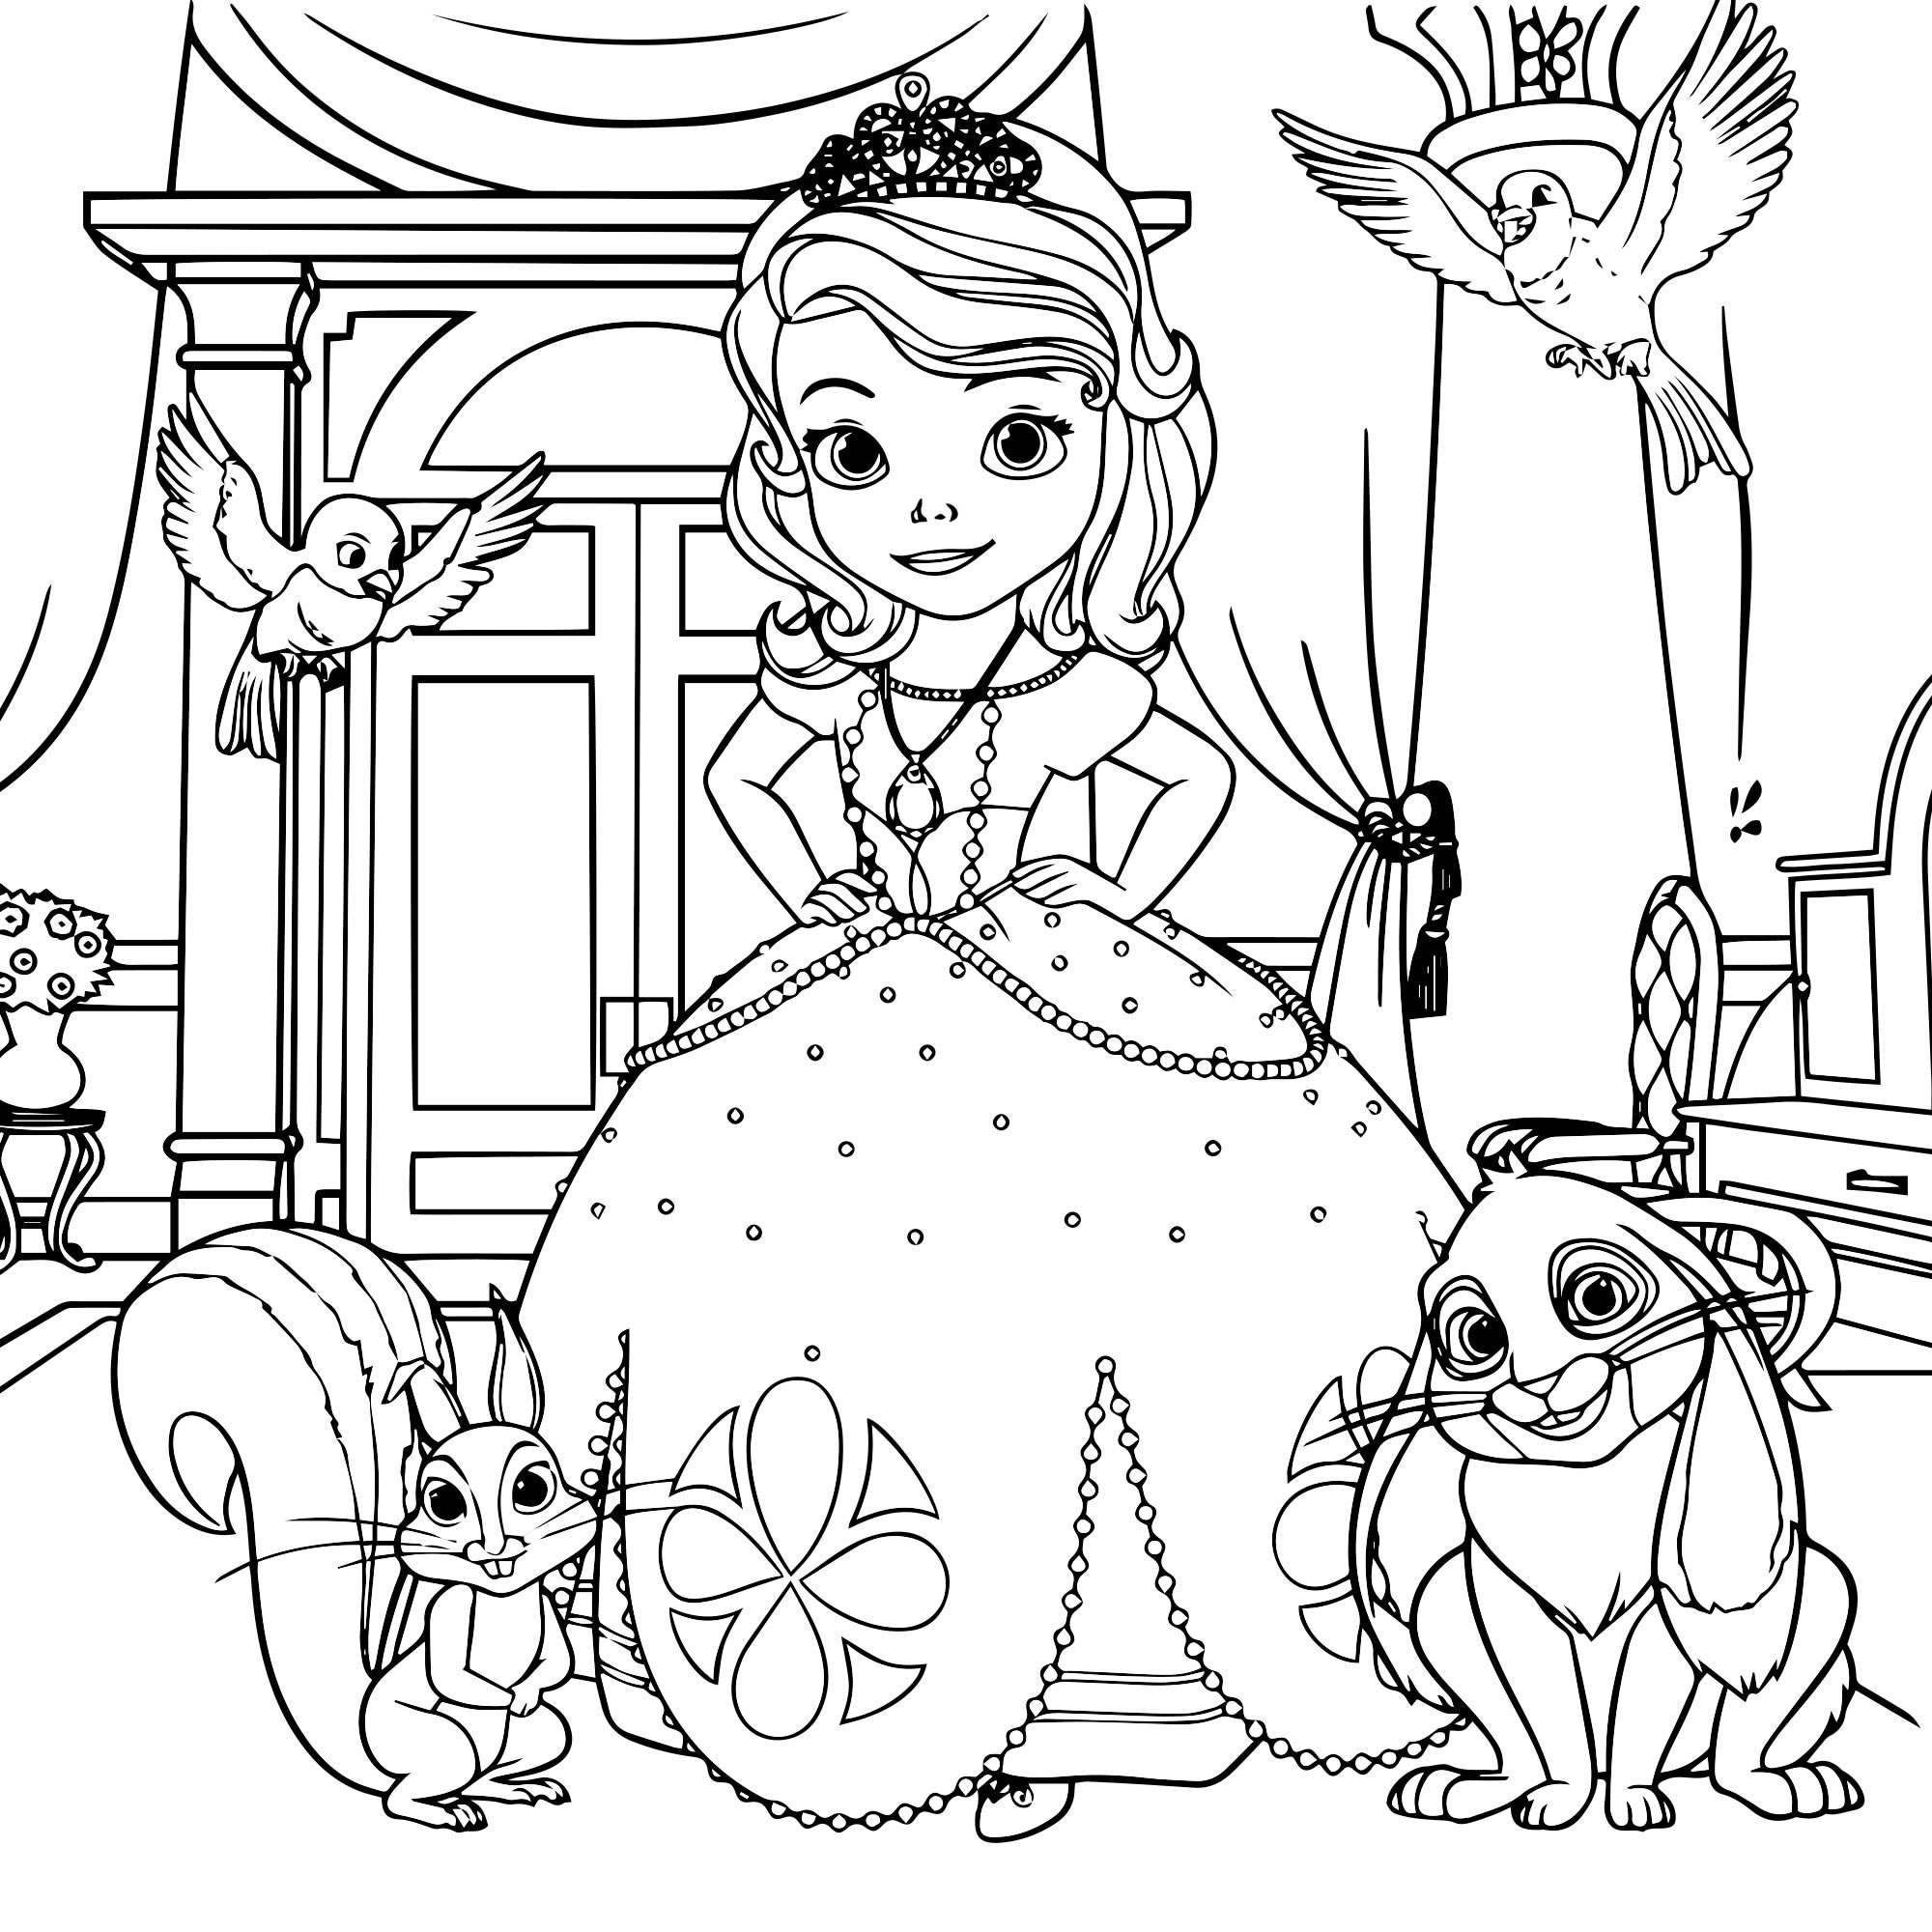 Sparkly princess coloring book for girls